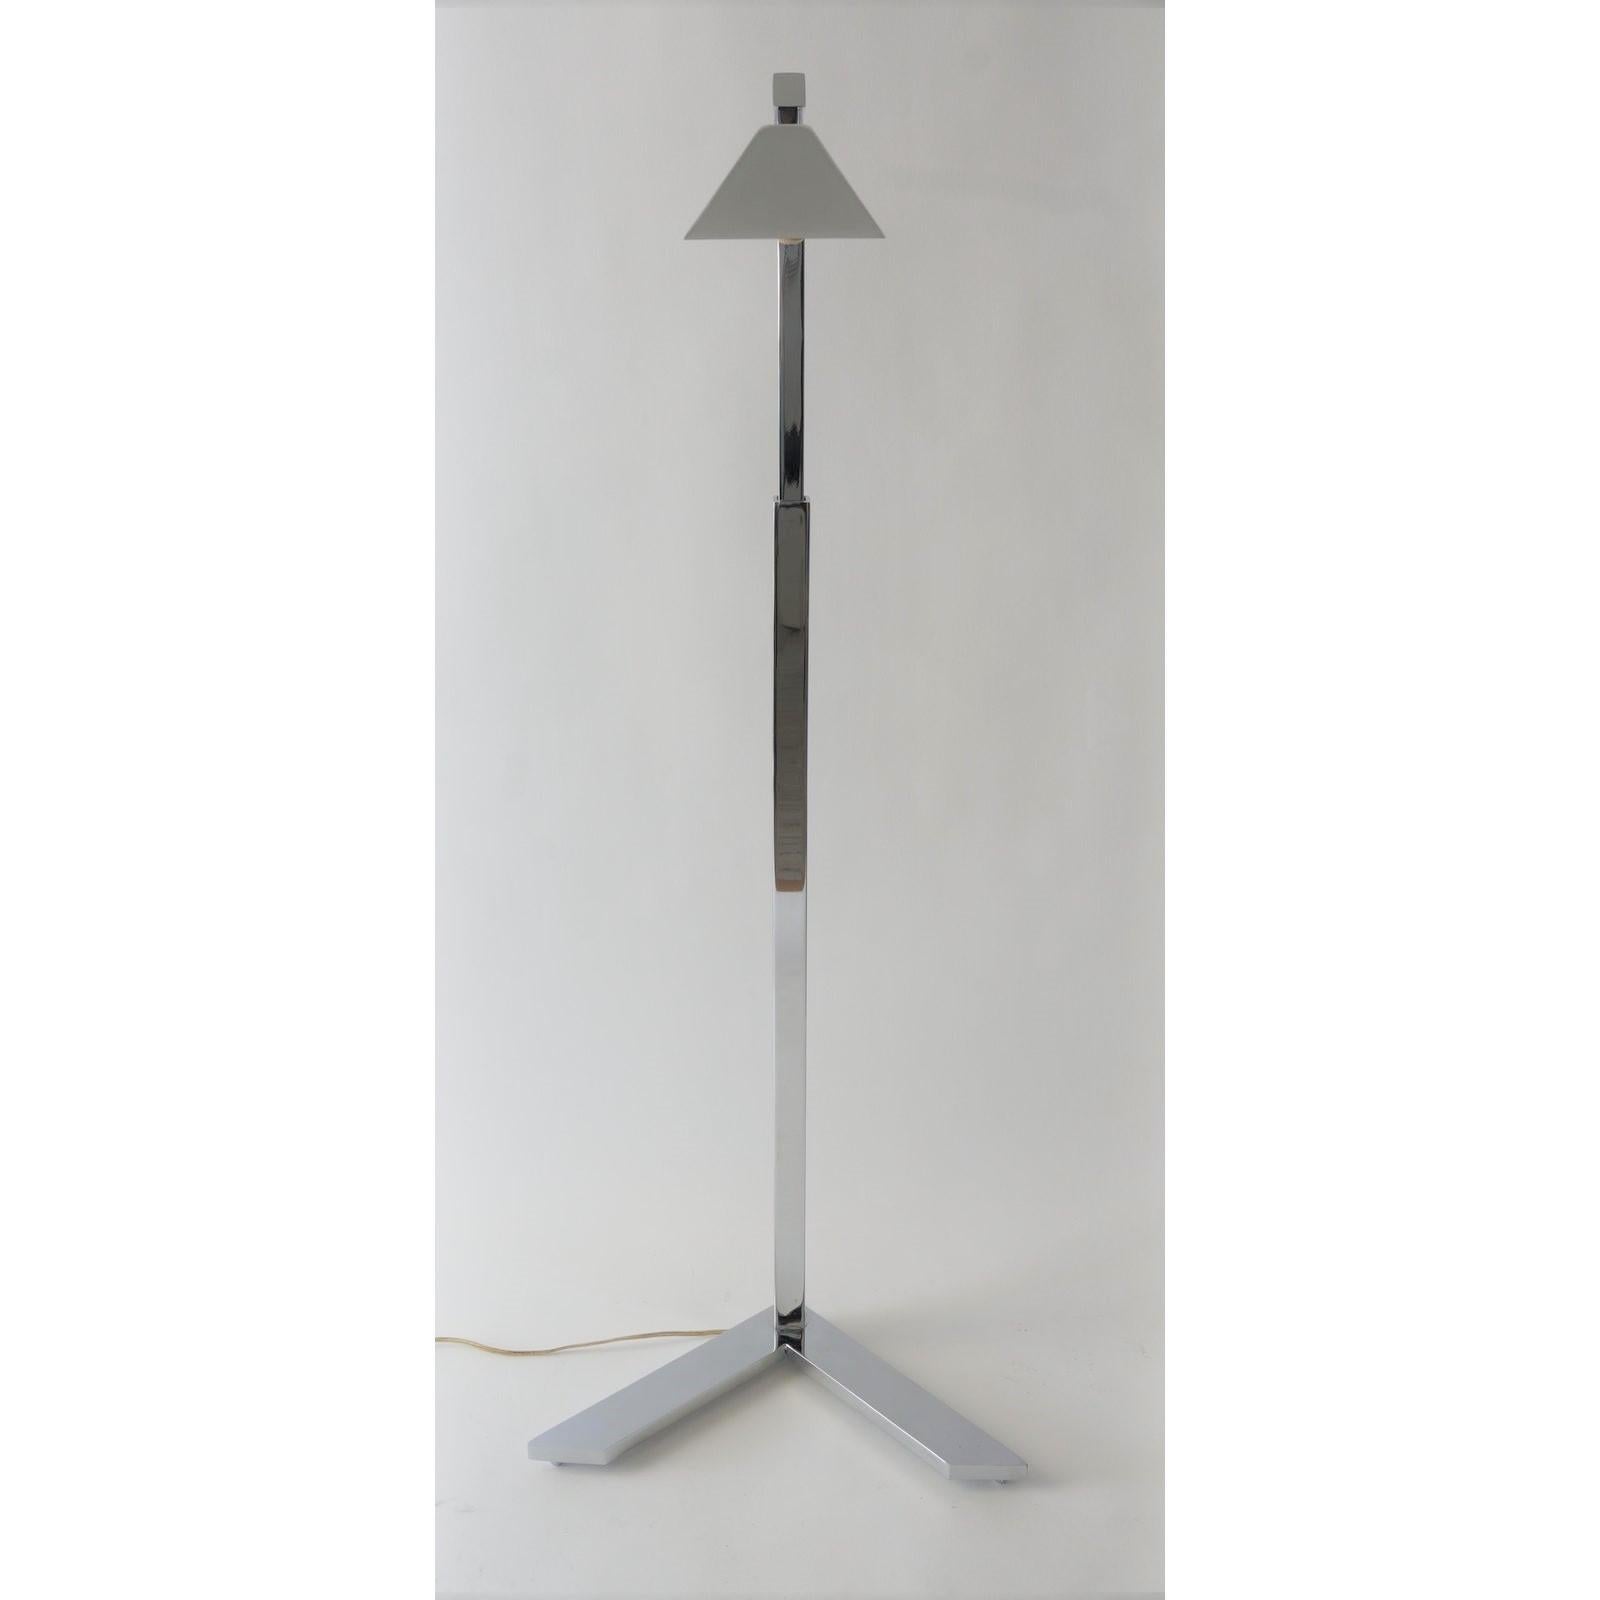 Casella Style Adjustable Chrome Floor Lamp In Good Condition For Sale In West Palm Beach, FL